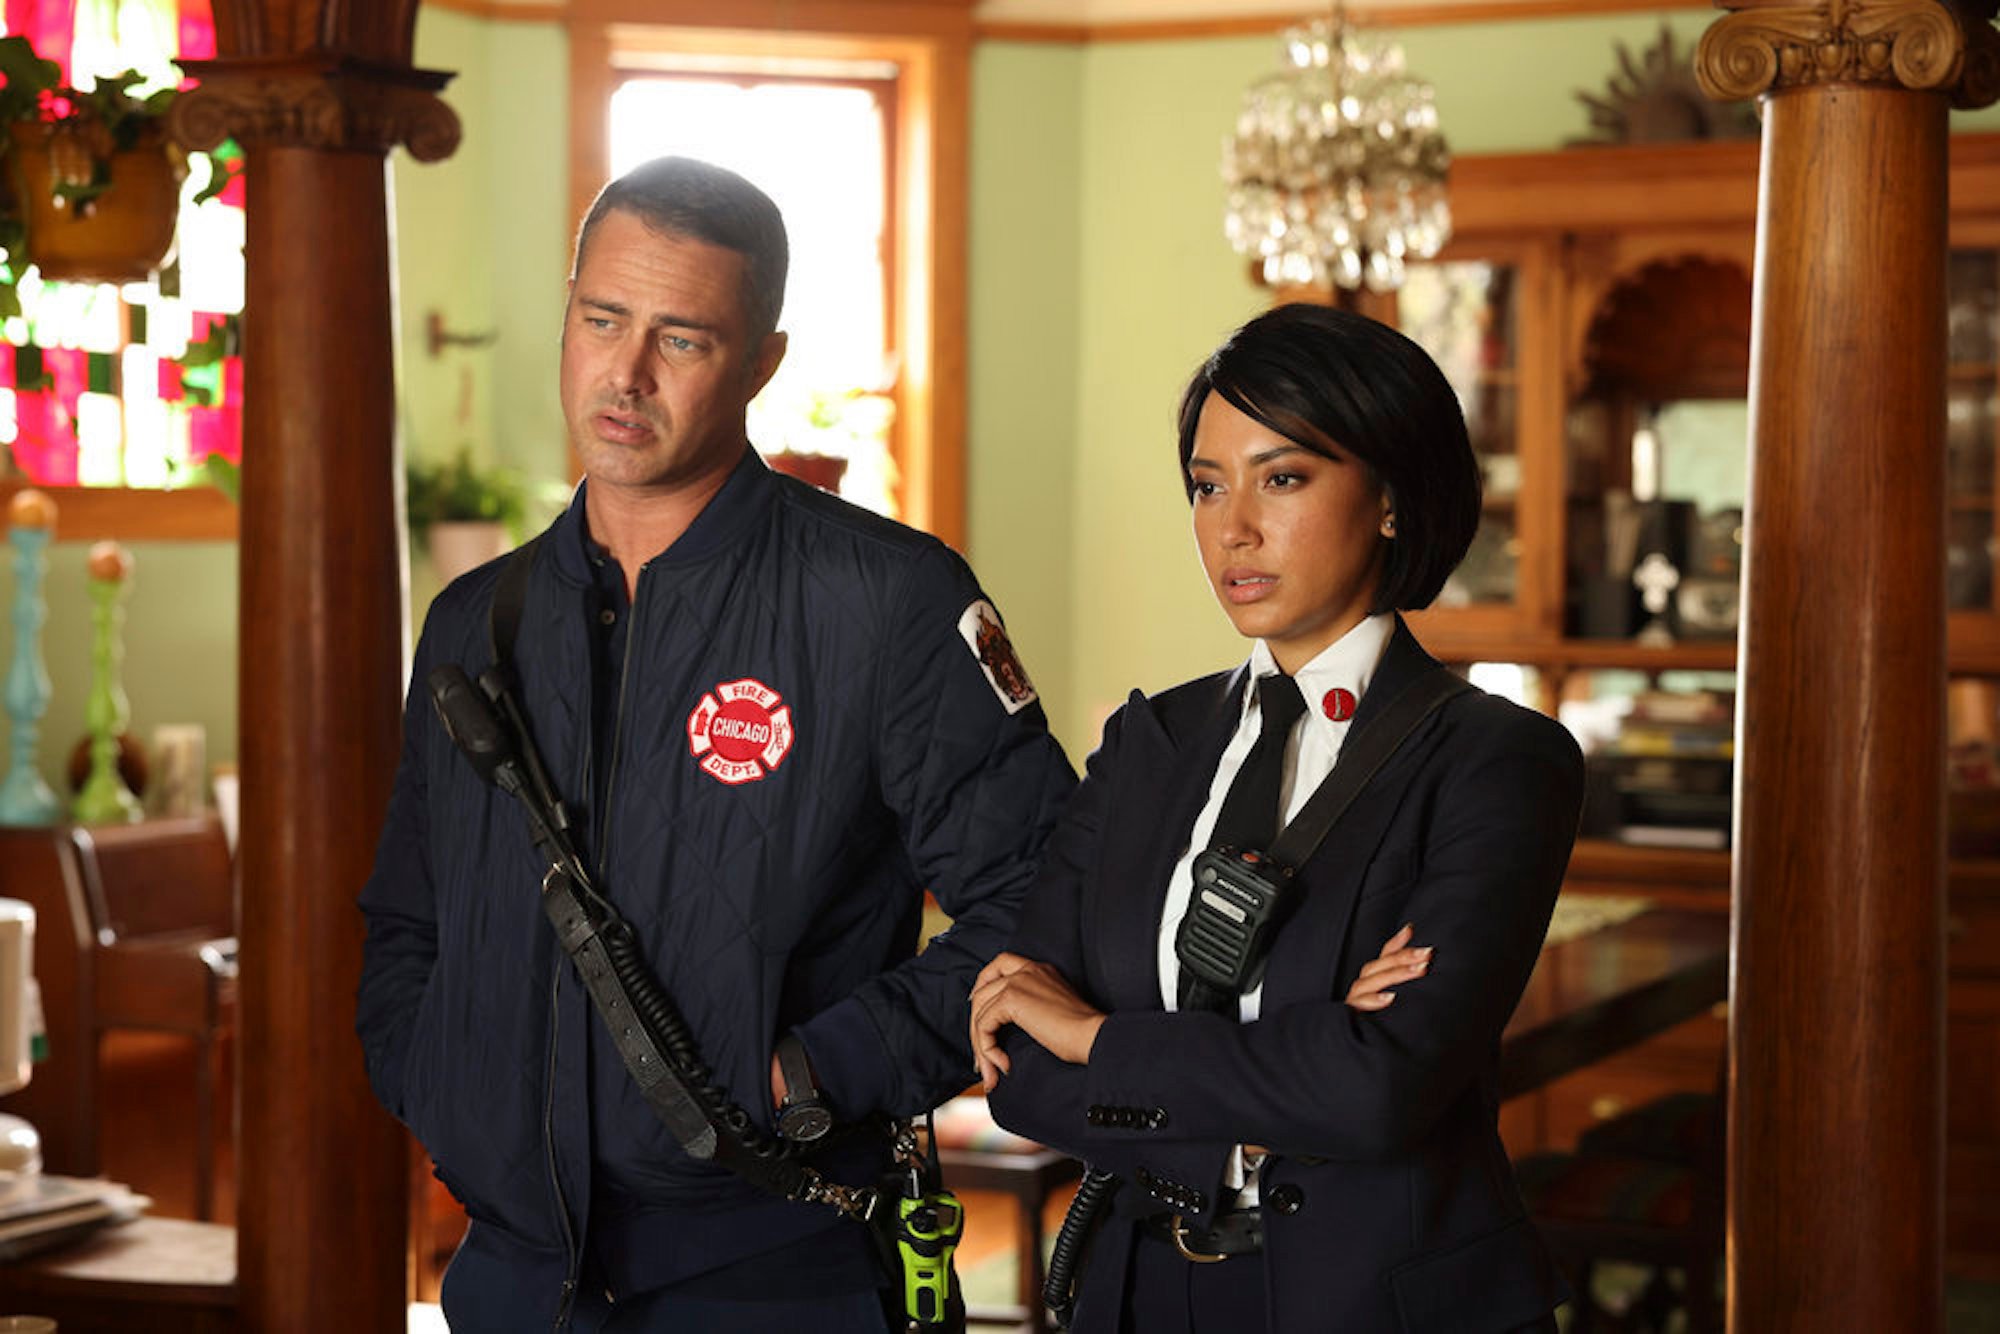 Taylor Kinney as Kelly Severide and Andy Allo as Wendy Seager standing next to each other in 'Chicago Fire' Season 10